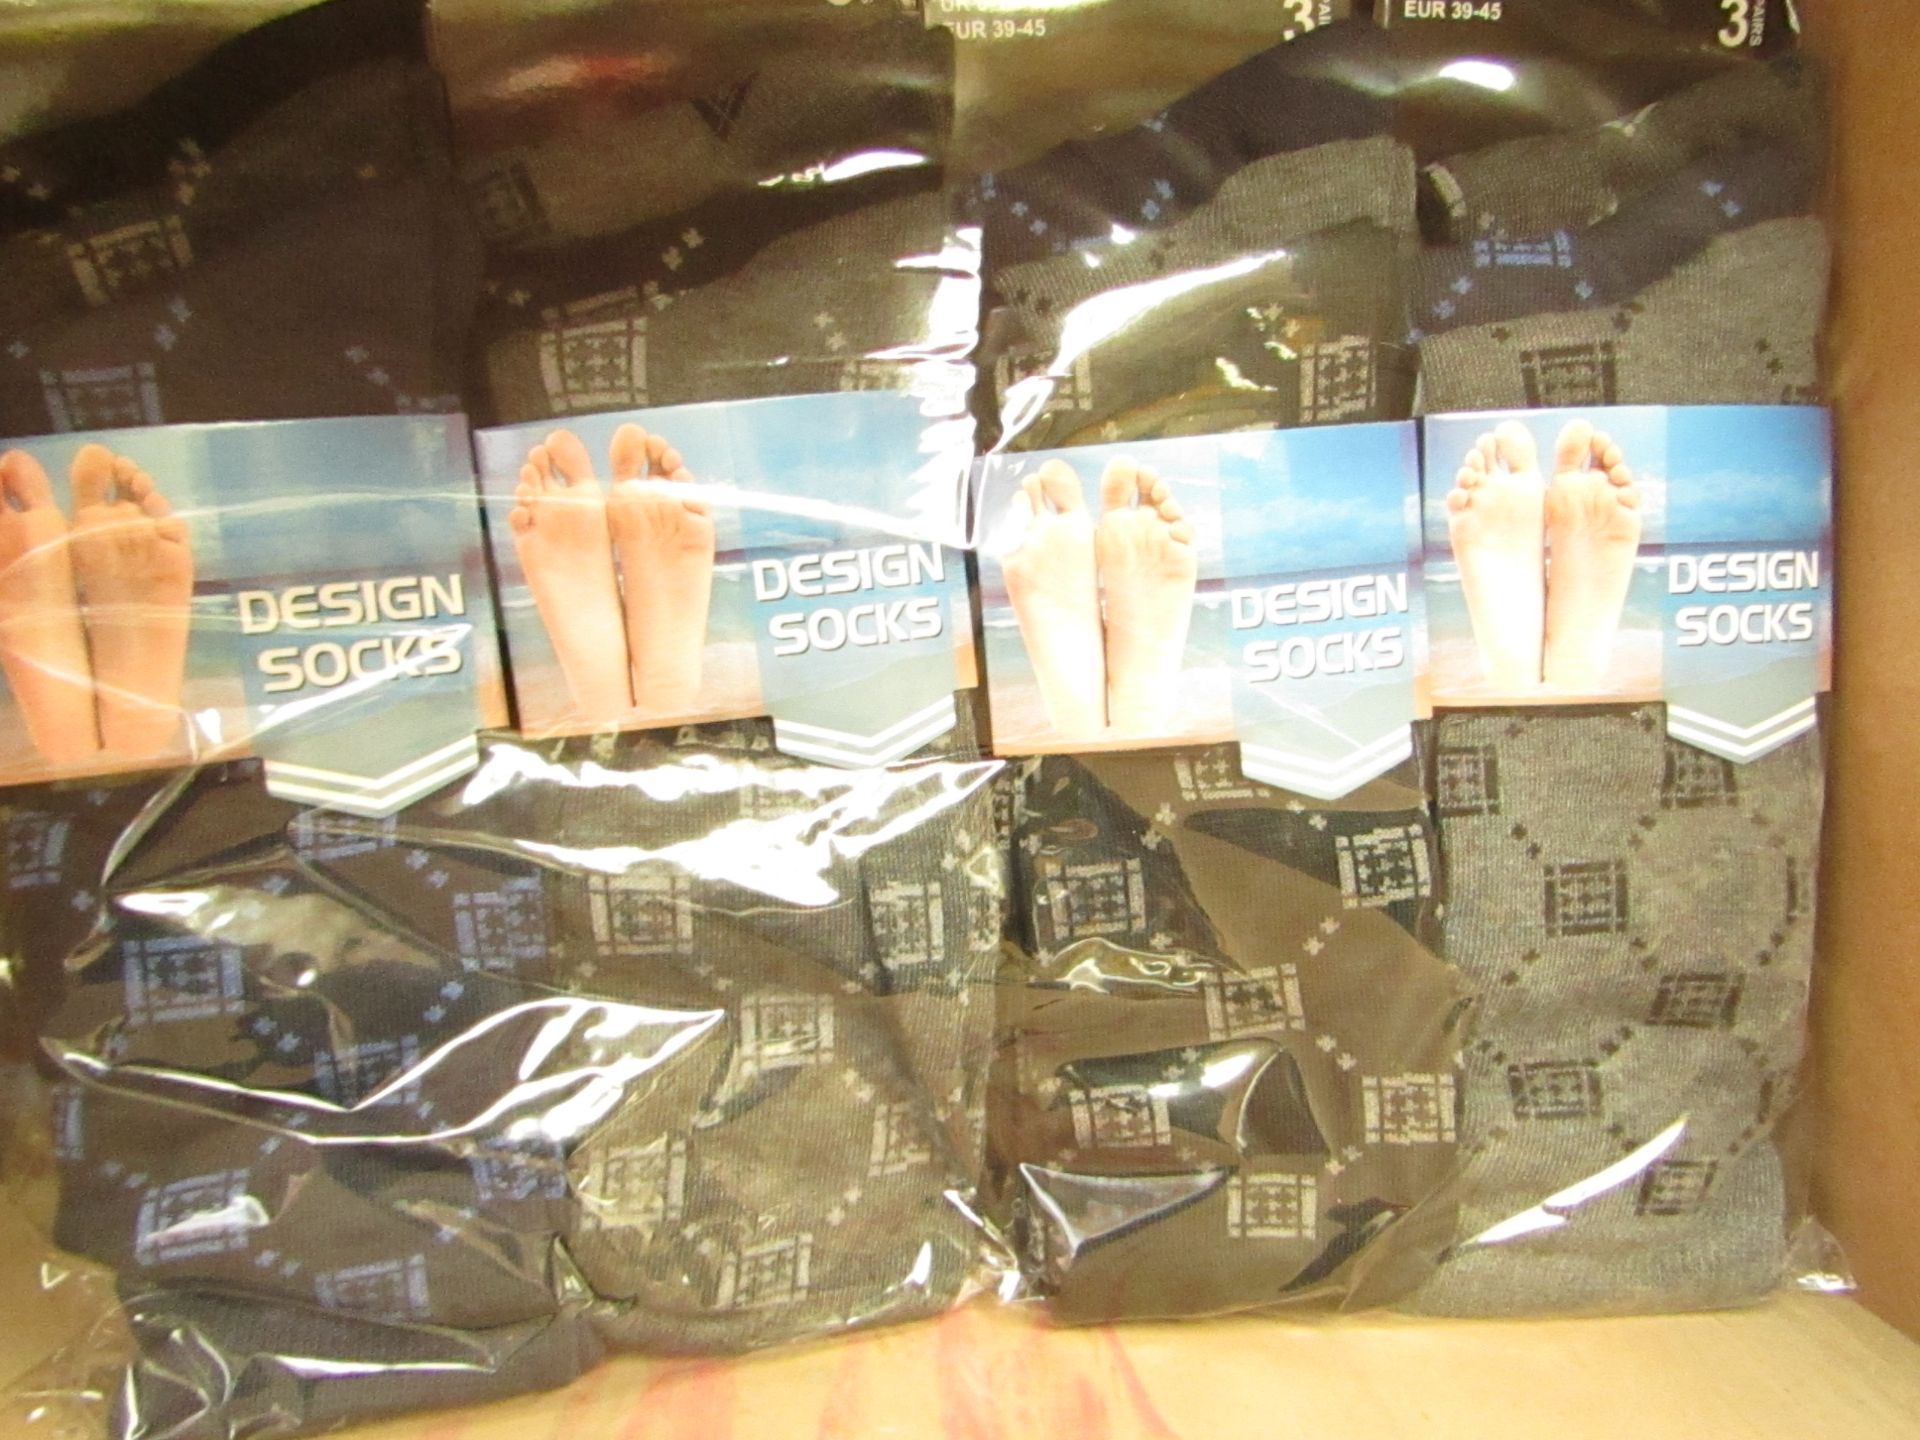 12 X Pairs of Mens Design Socks size 6-11 new in packaging (see image for design)